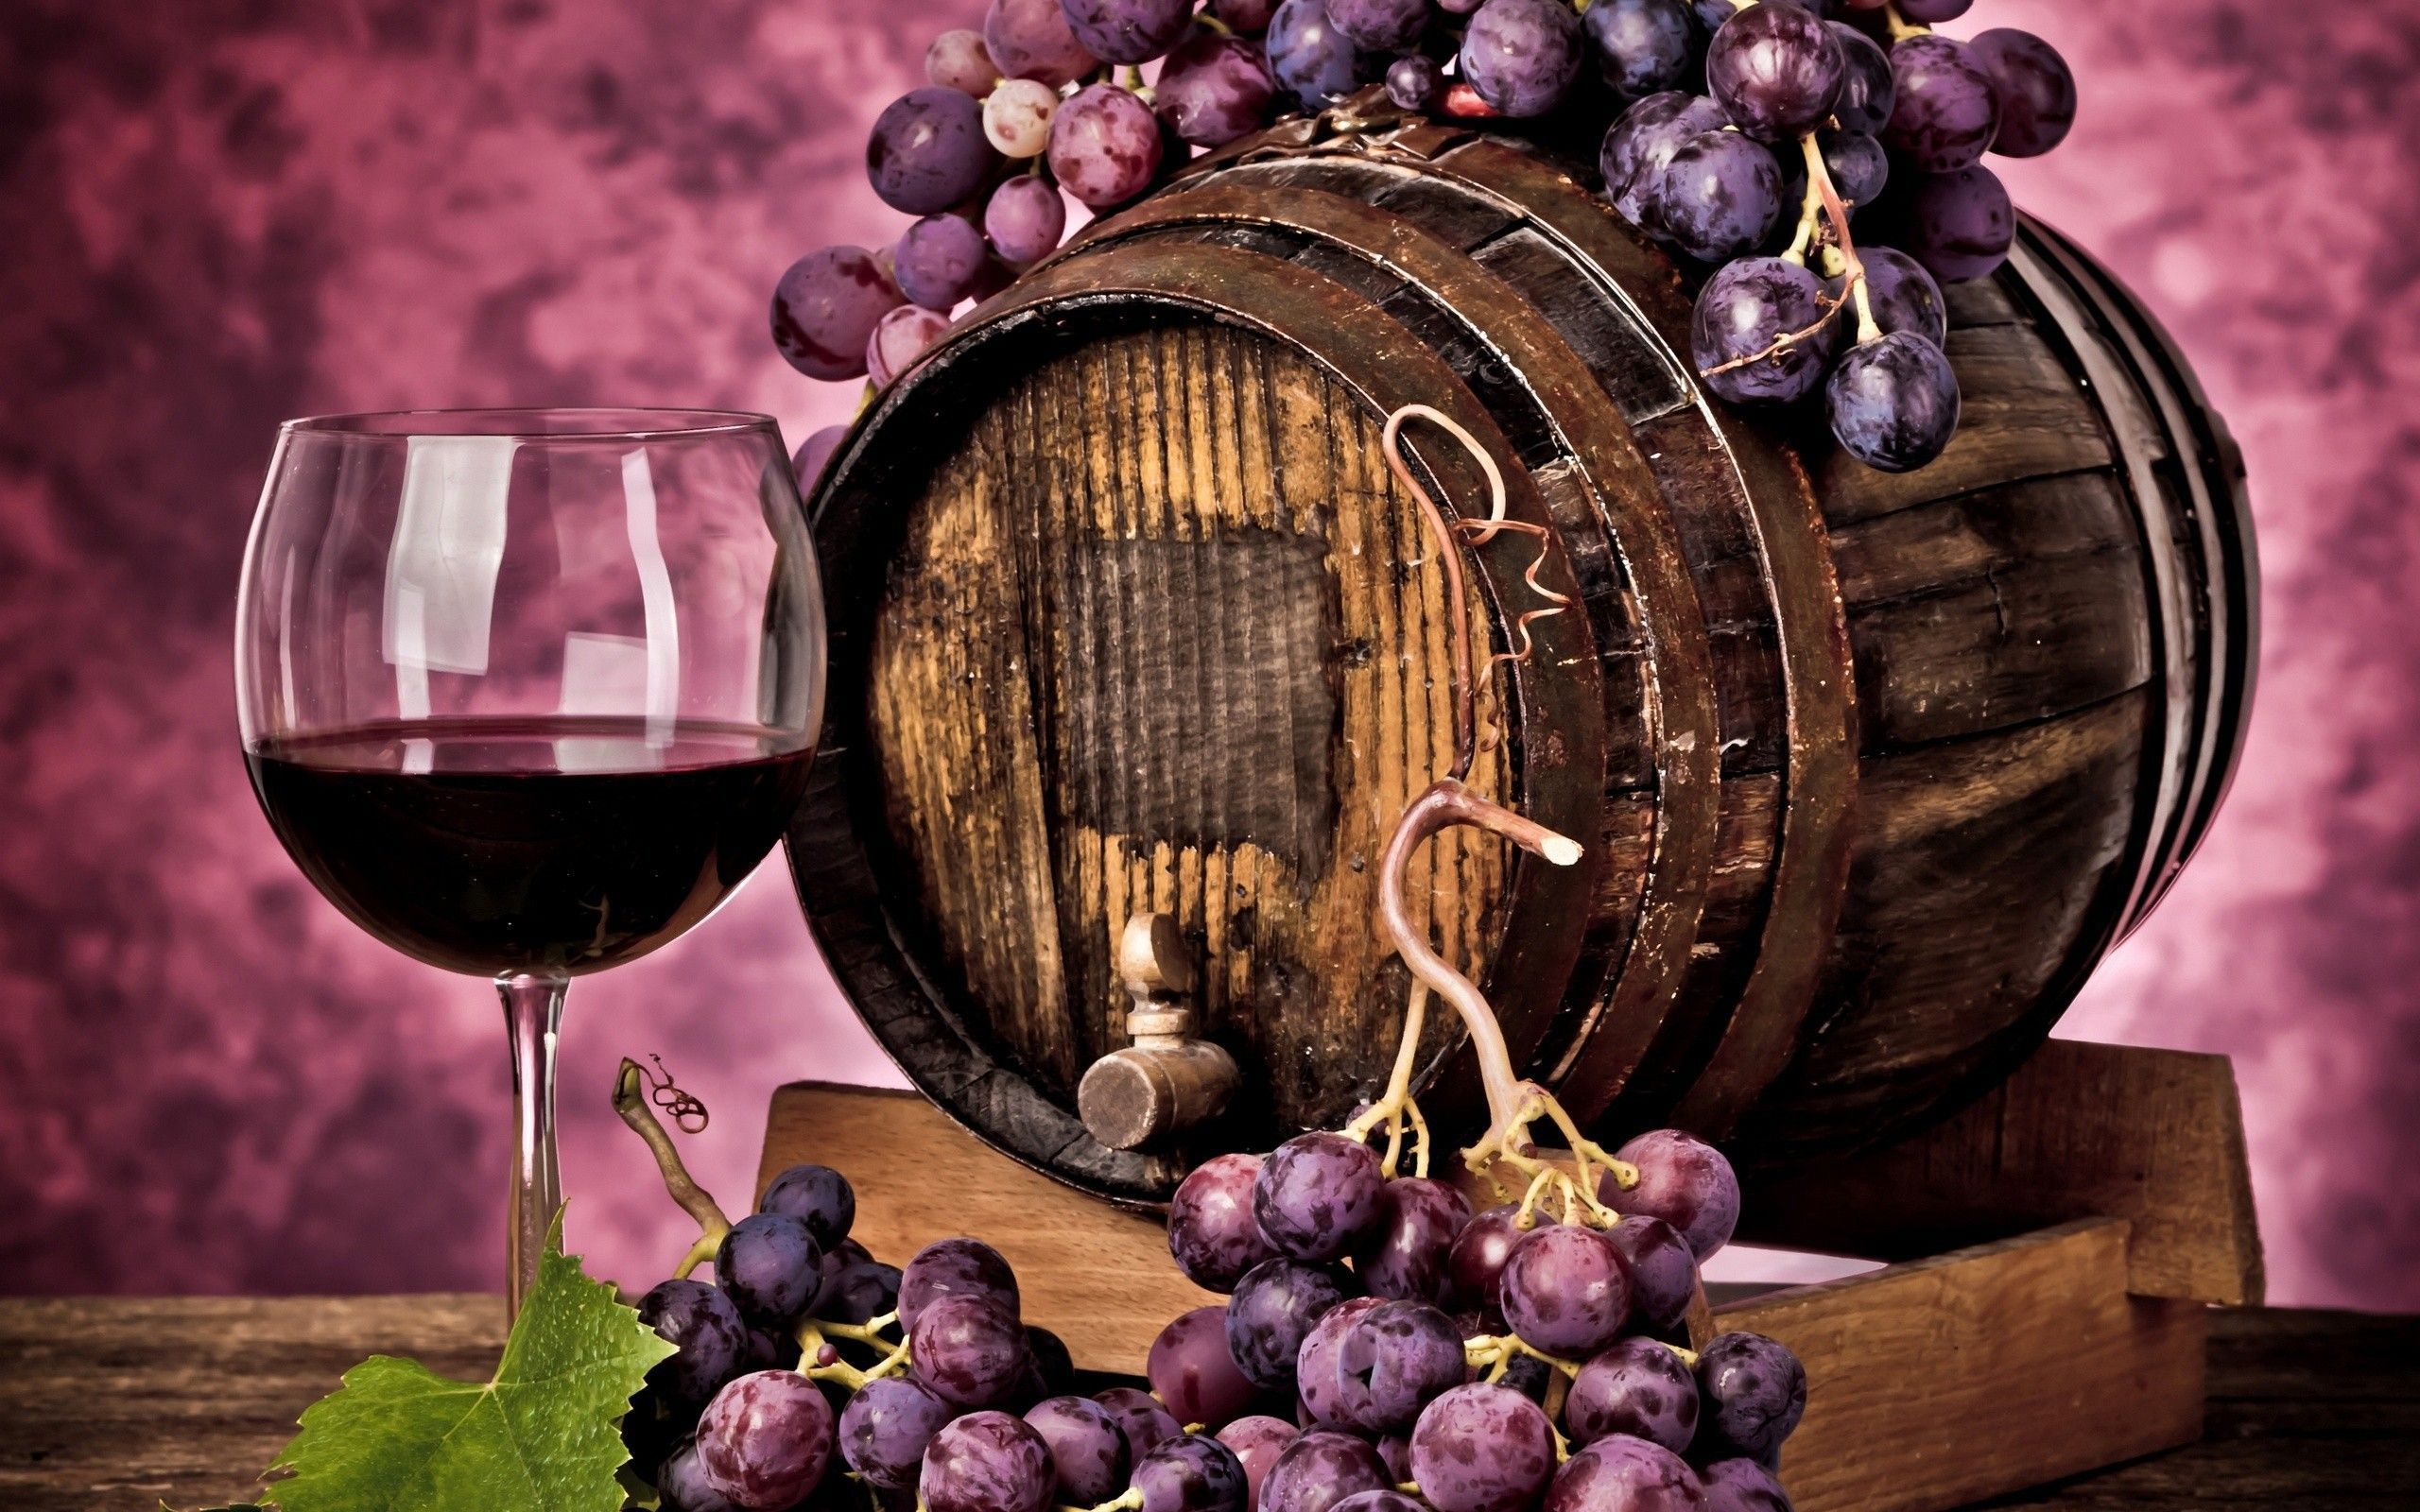 A barrel of wine wallpapers and images - wallpapers, pictures, photos